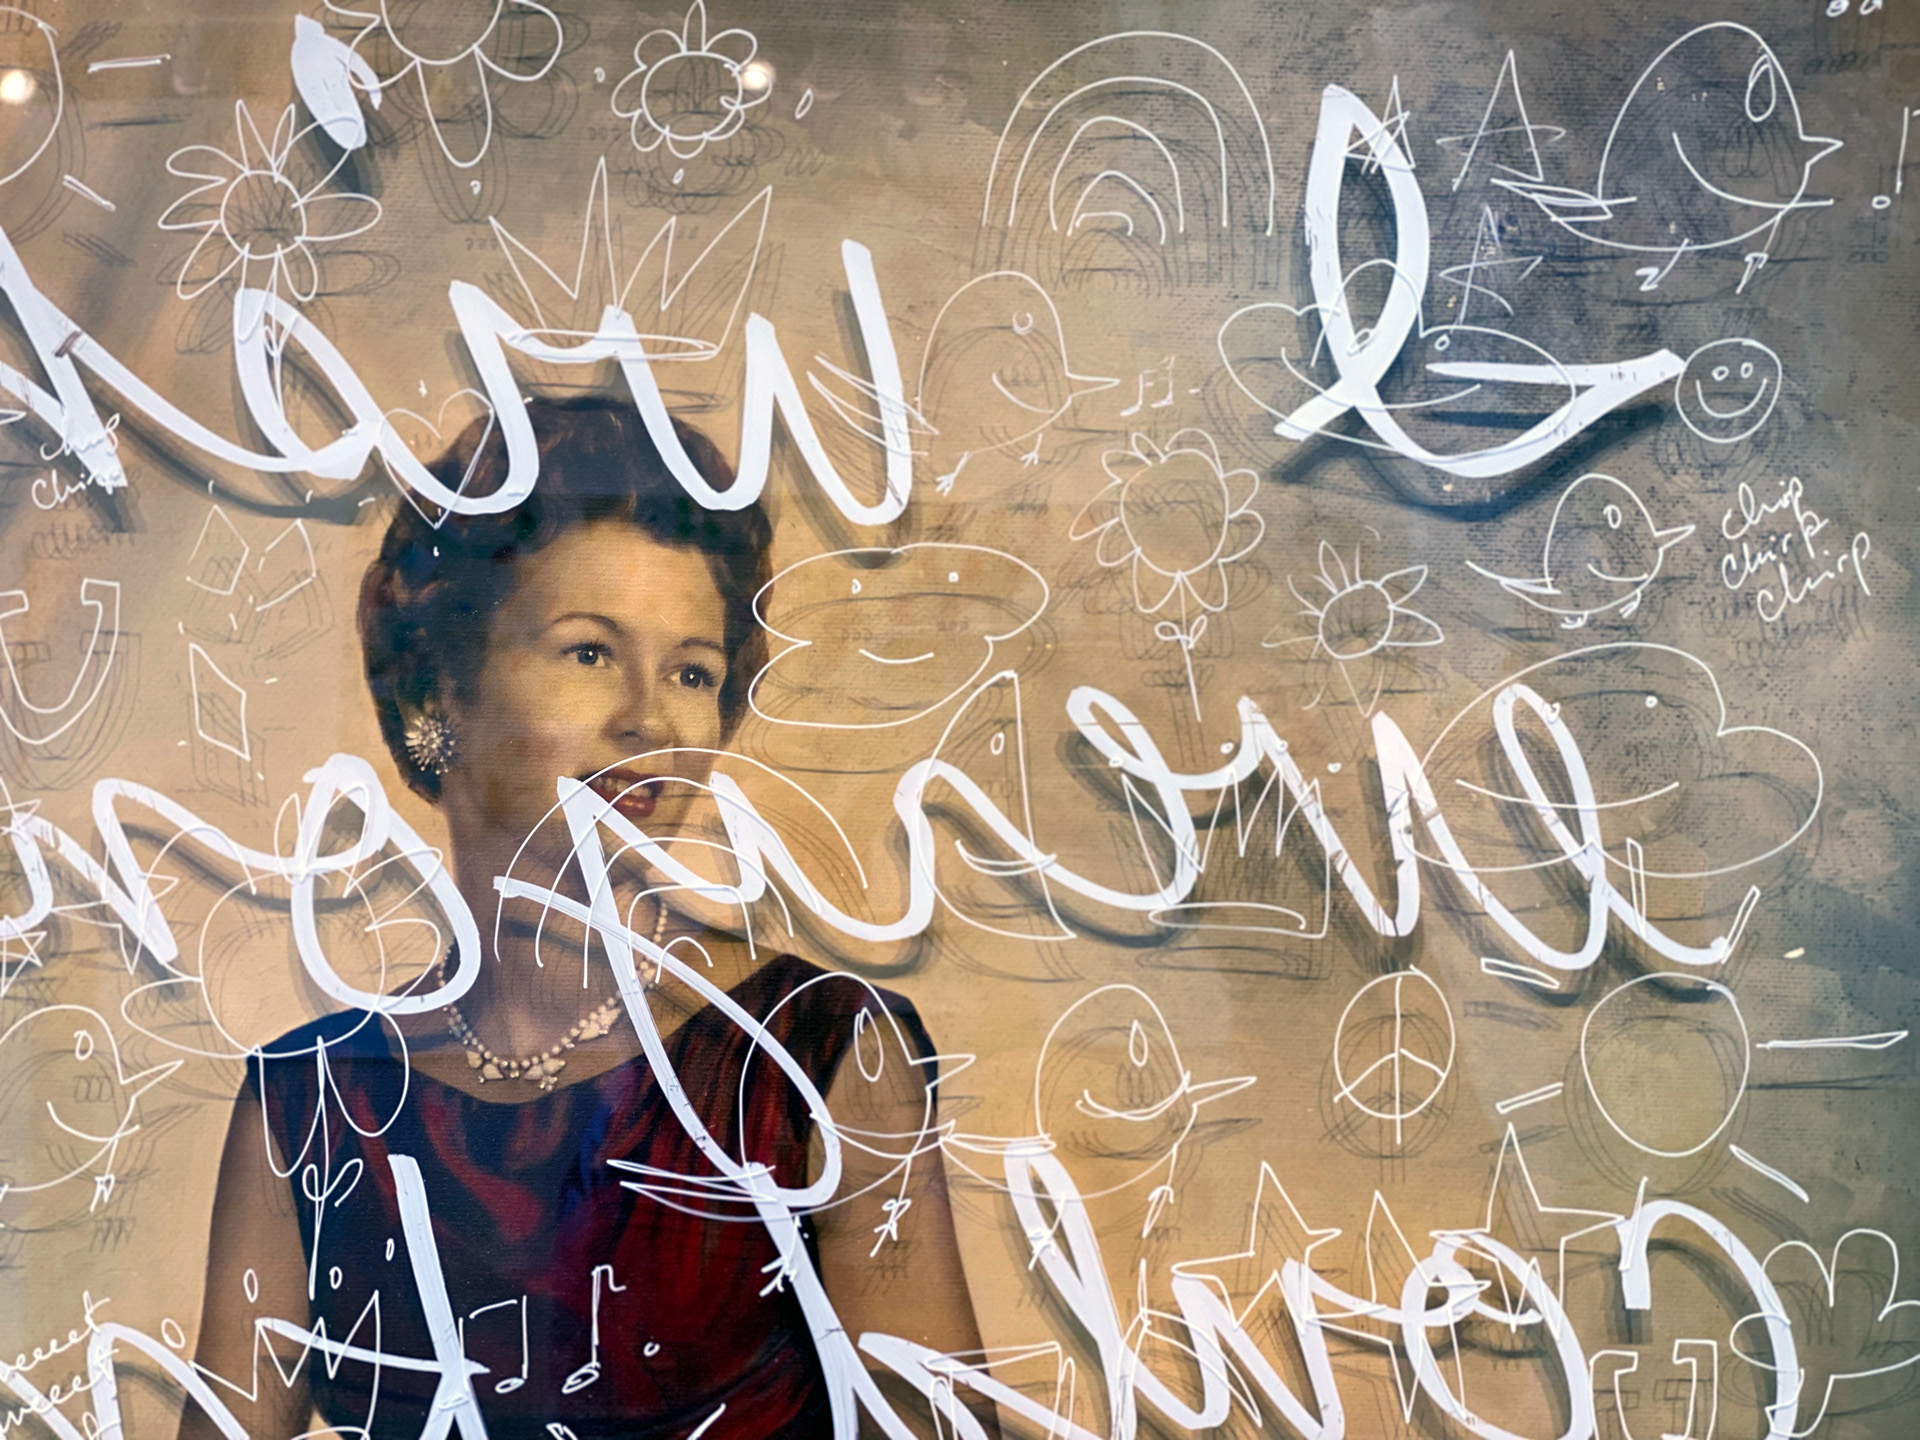 A close-up of the work inspired by Nellie's wish is a traditional portrait with handwriting all over the glass. "I wish everyone could know me on my best days, not my worst."